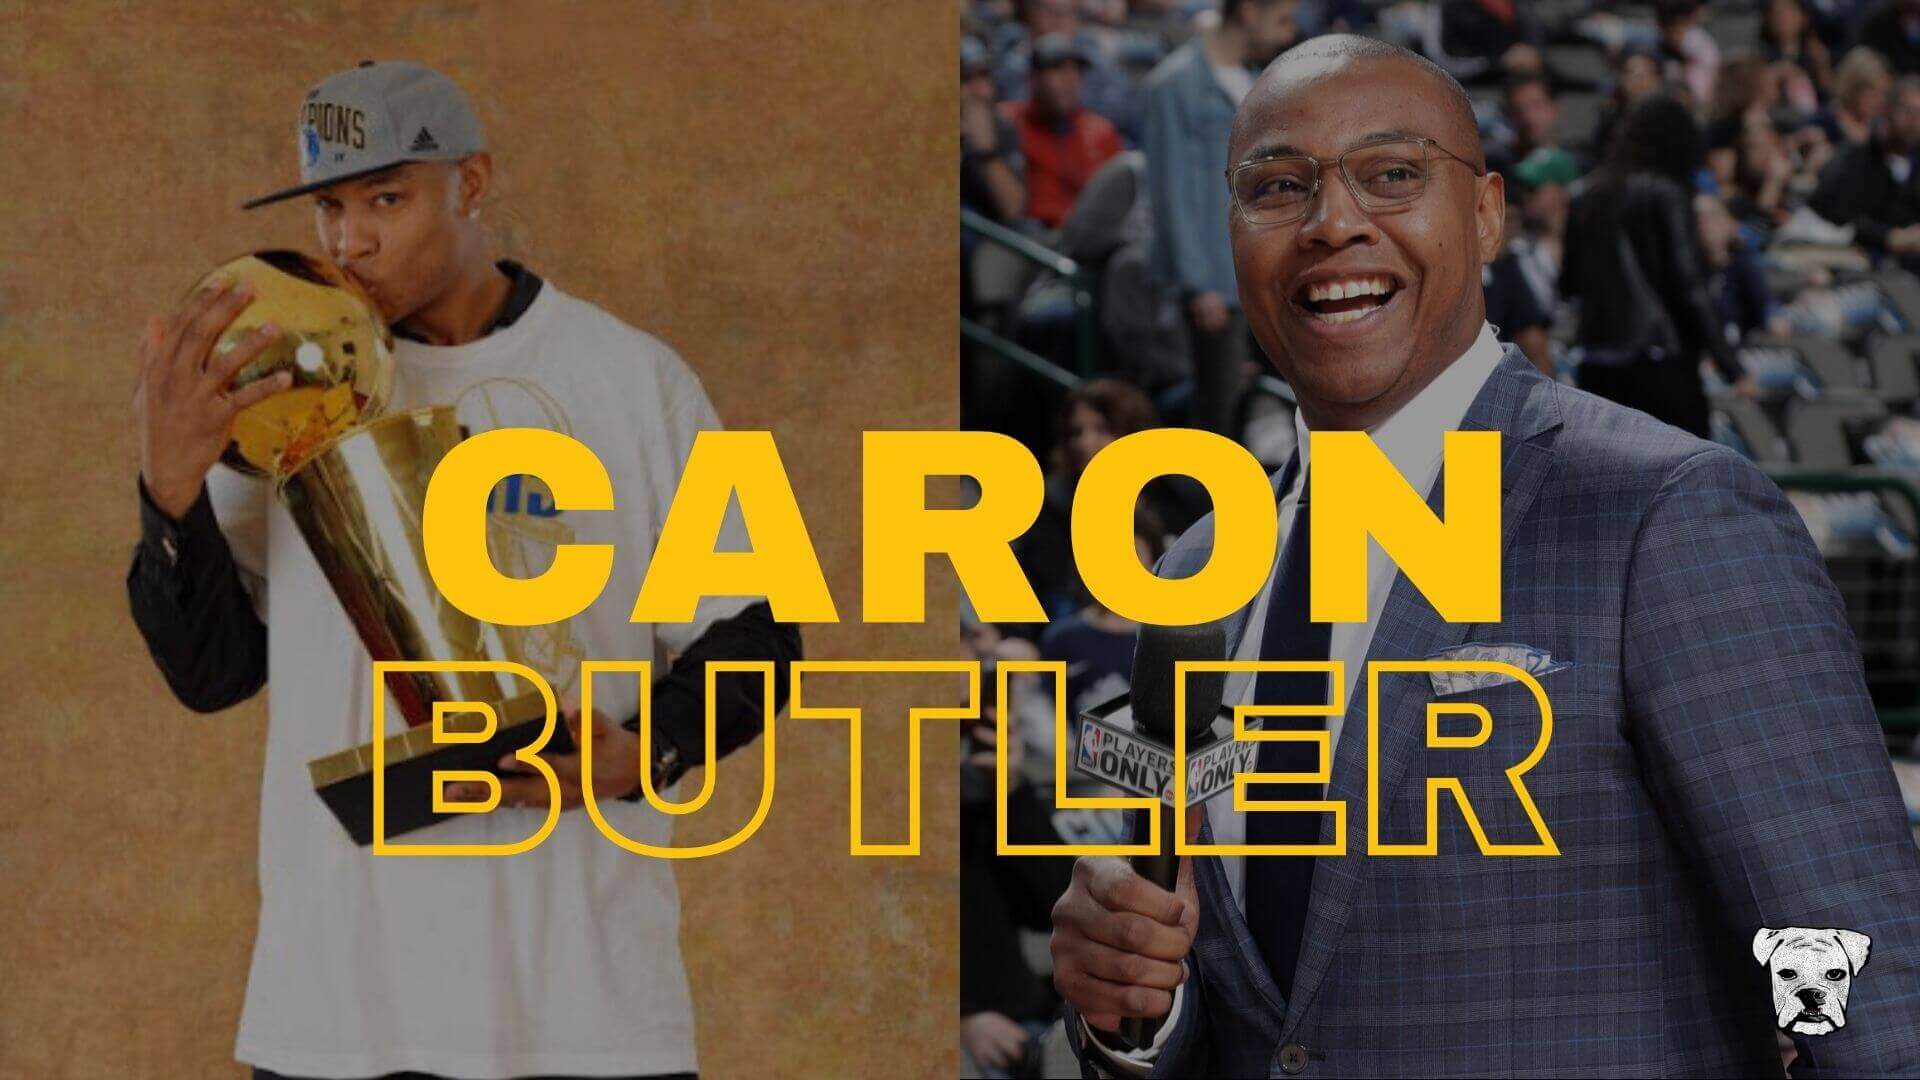 Caron Butler went from unlikely NBA champion to fighting against solitary confinement in prisons